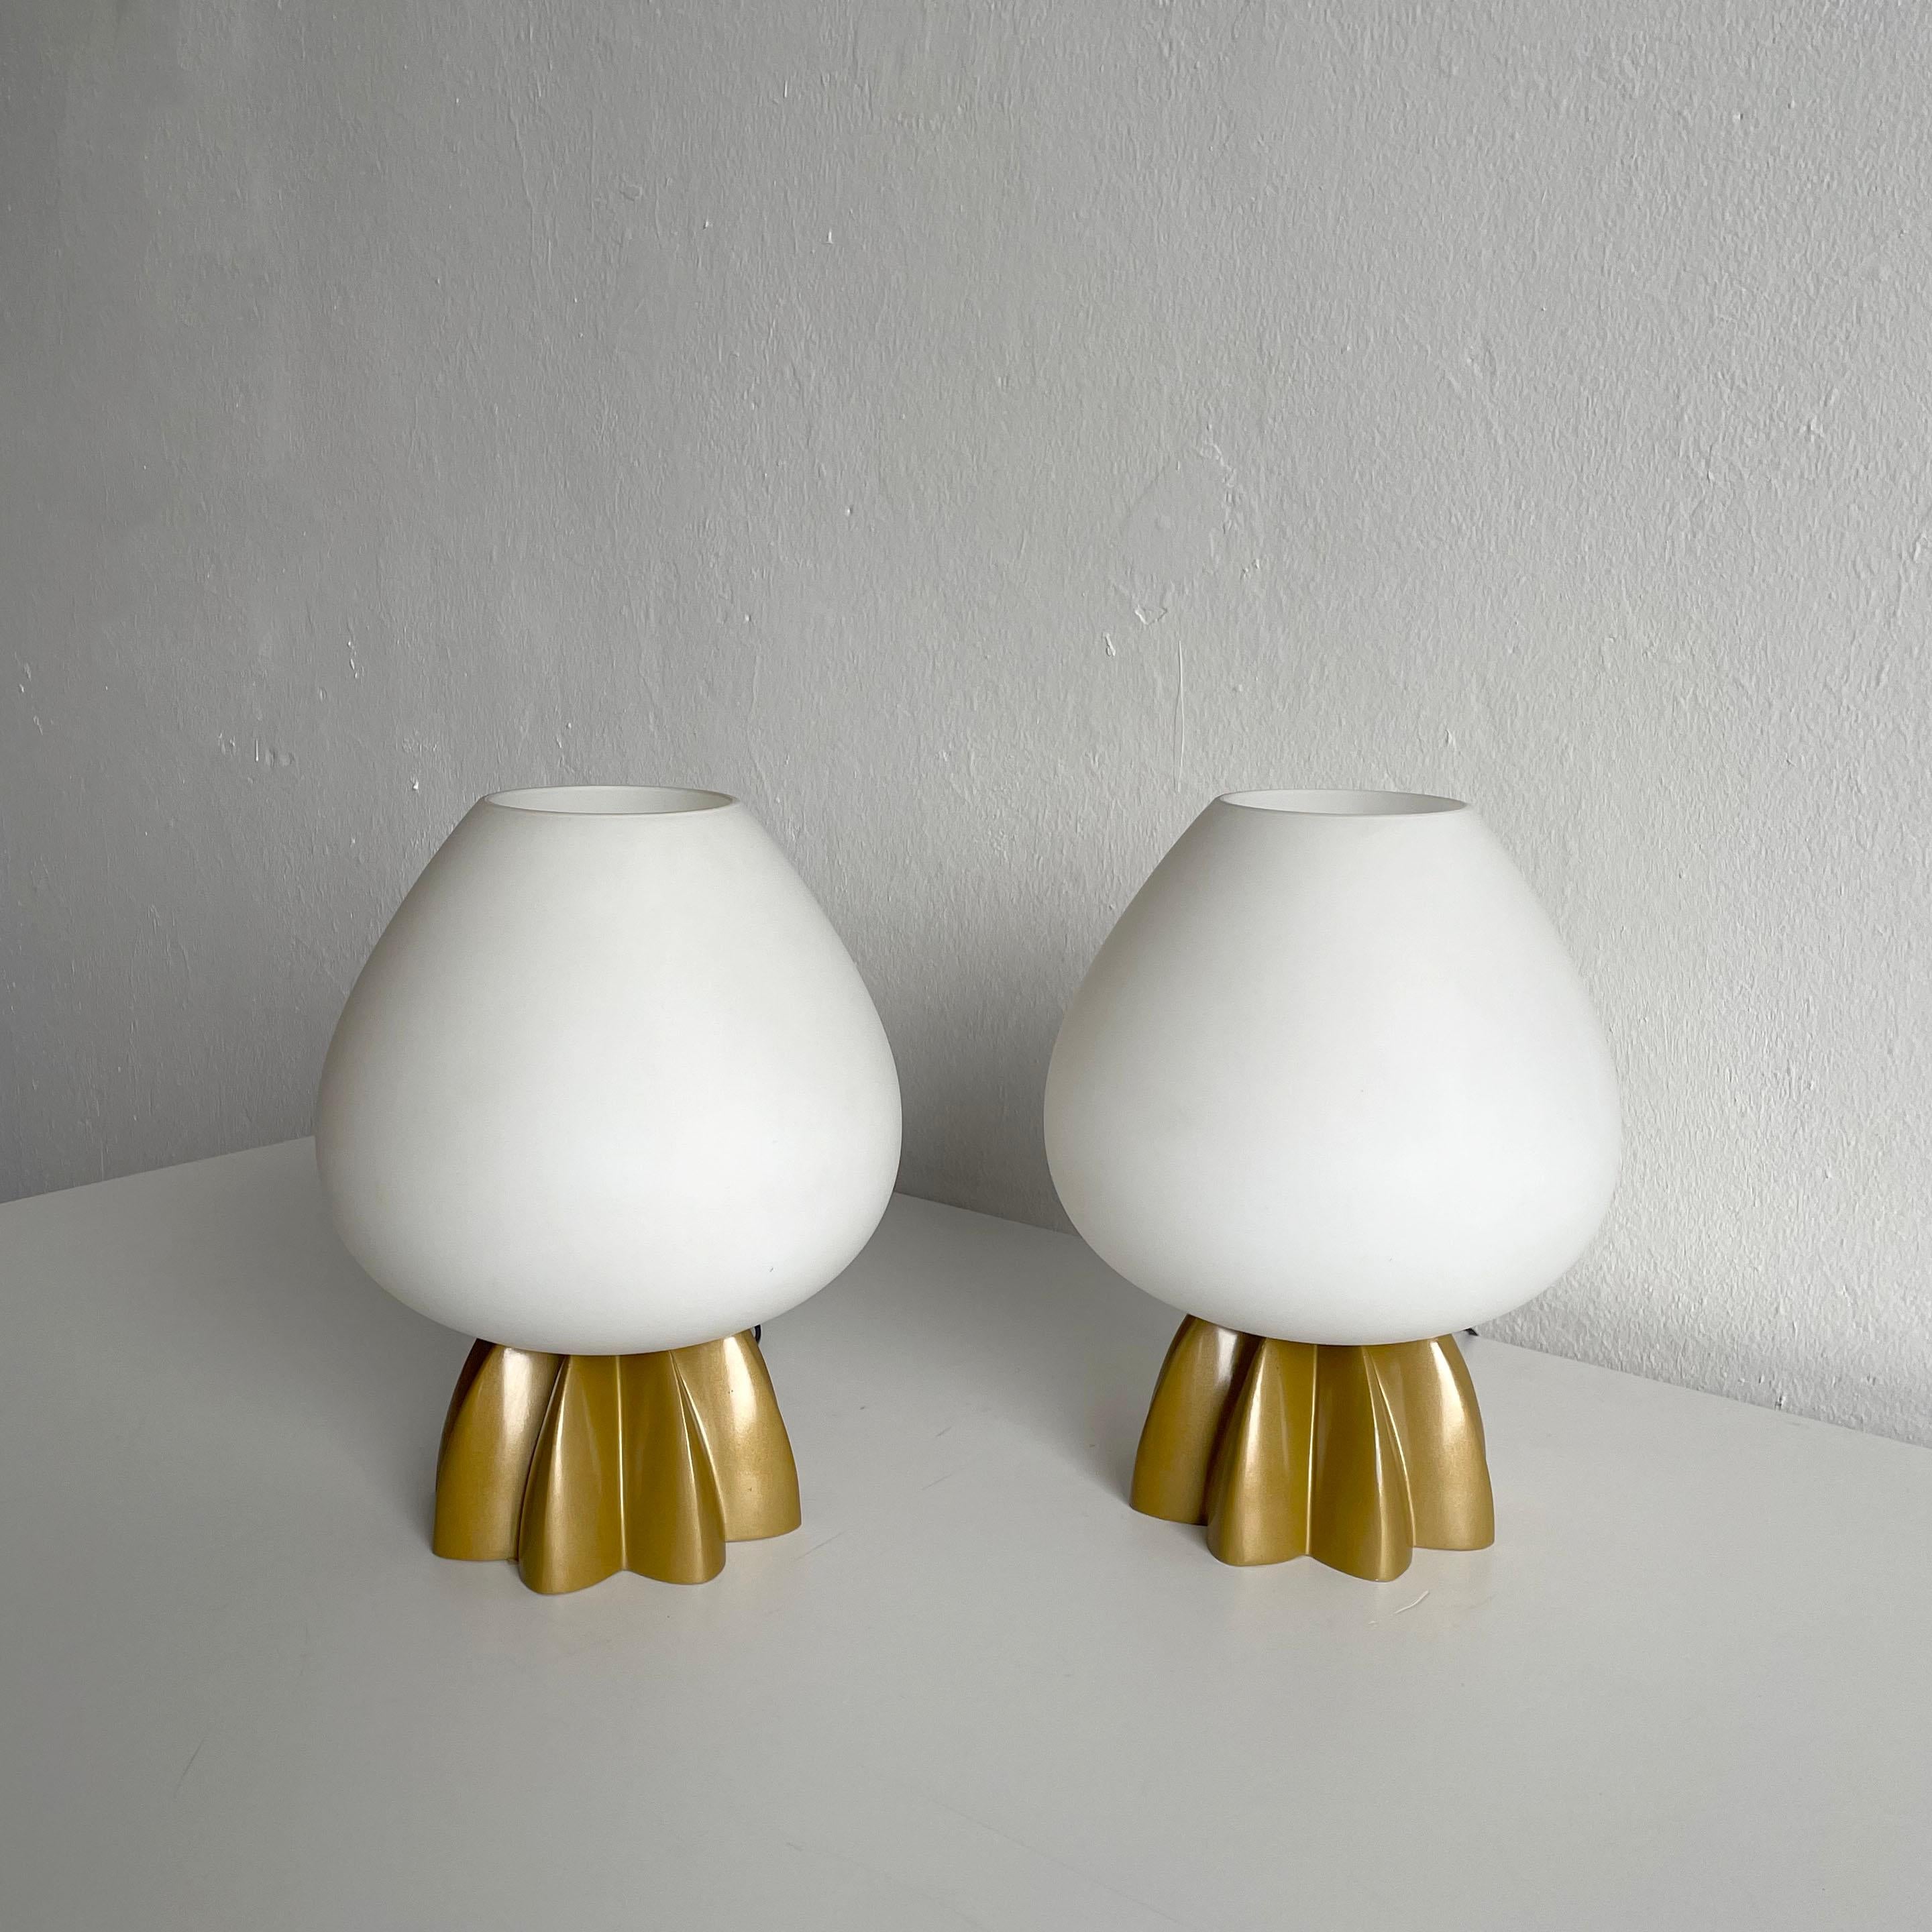 Pair of very rare table lamps by Rodolfo Dordoni for Italian company Foscarini with Murano Vetri Lampshades. 
The name of this rare model of the lamps is '' Fruits Tavolo ''.

Both lamps are in good vintage condition. The glass shades have some